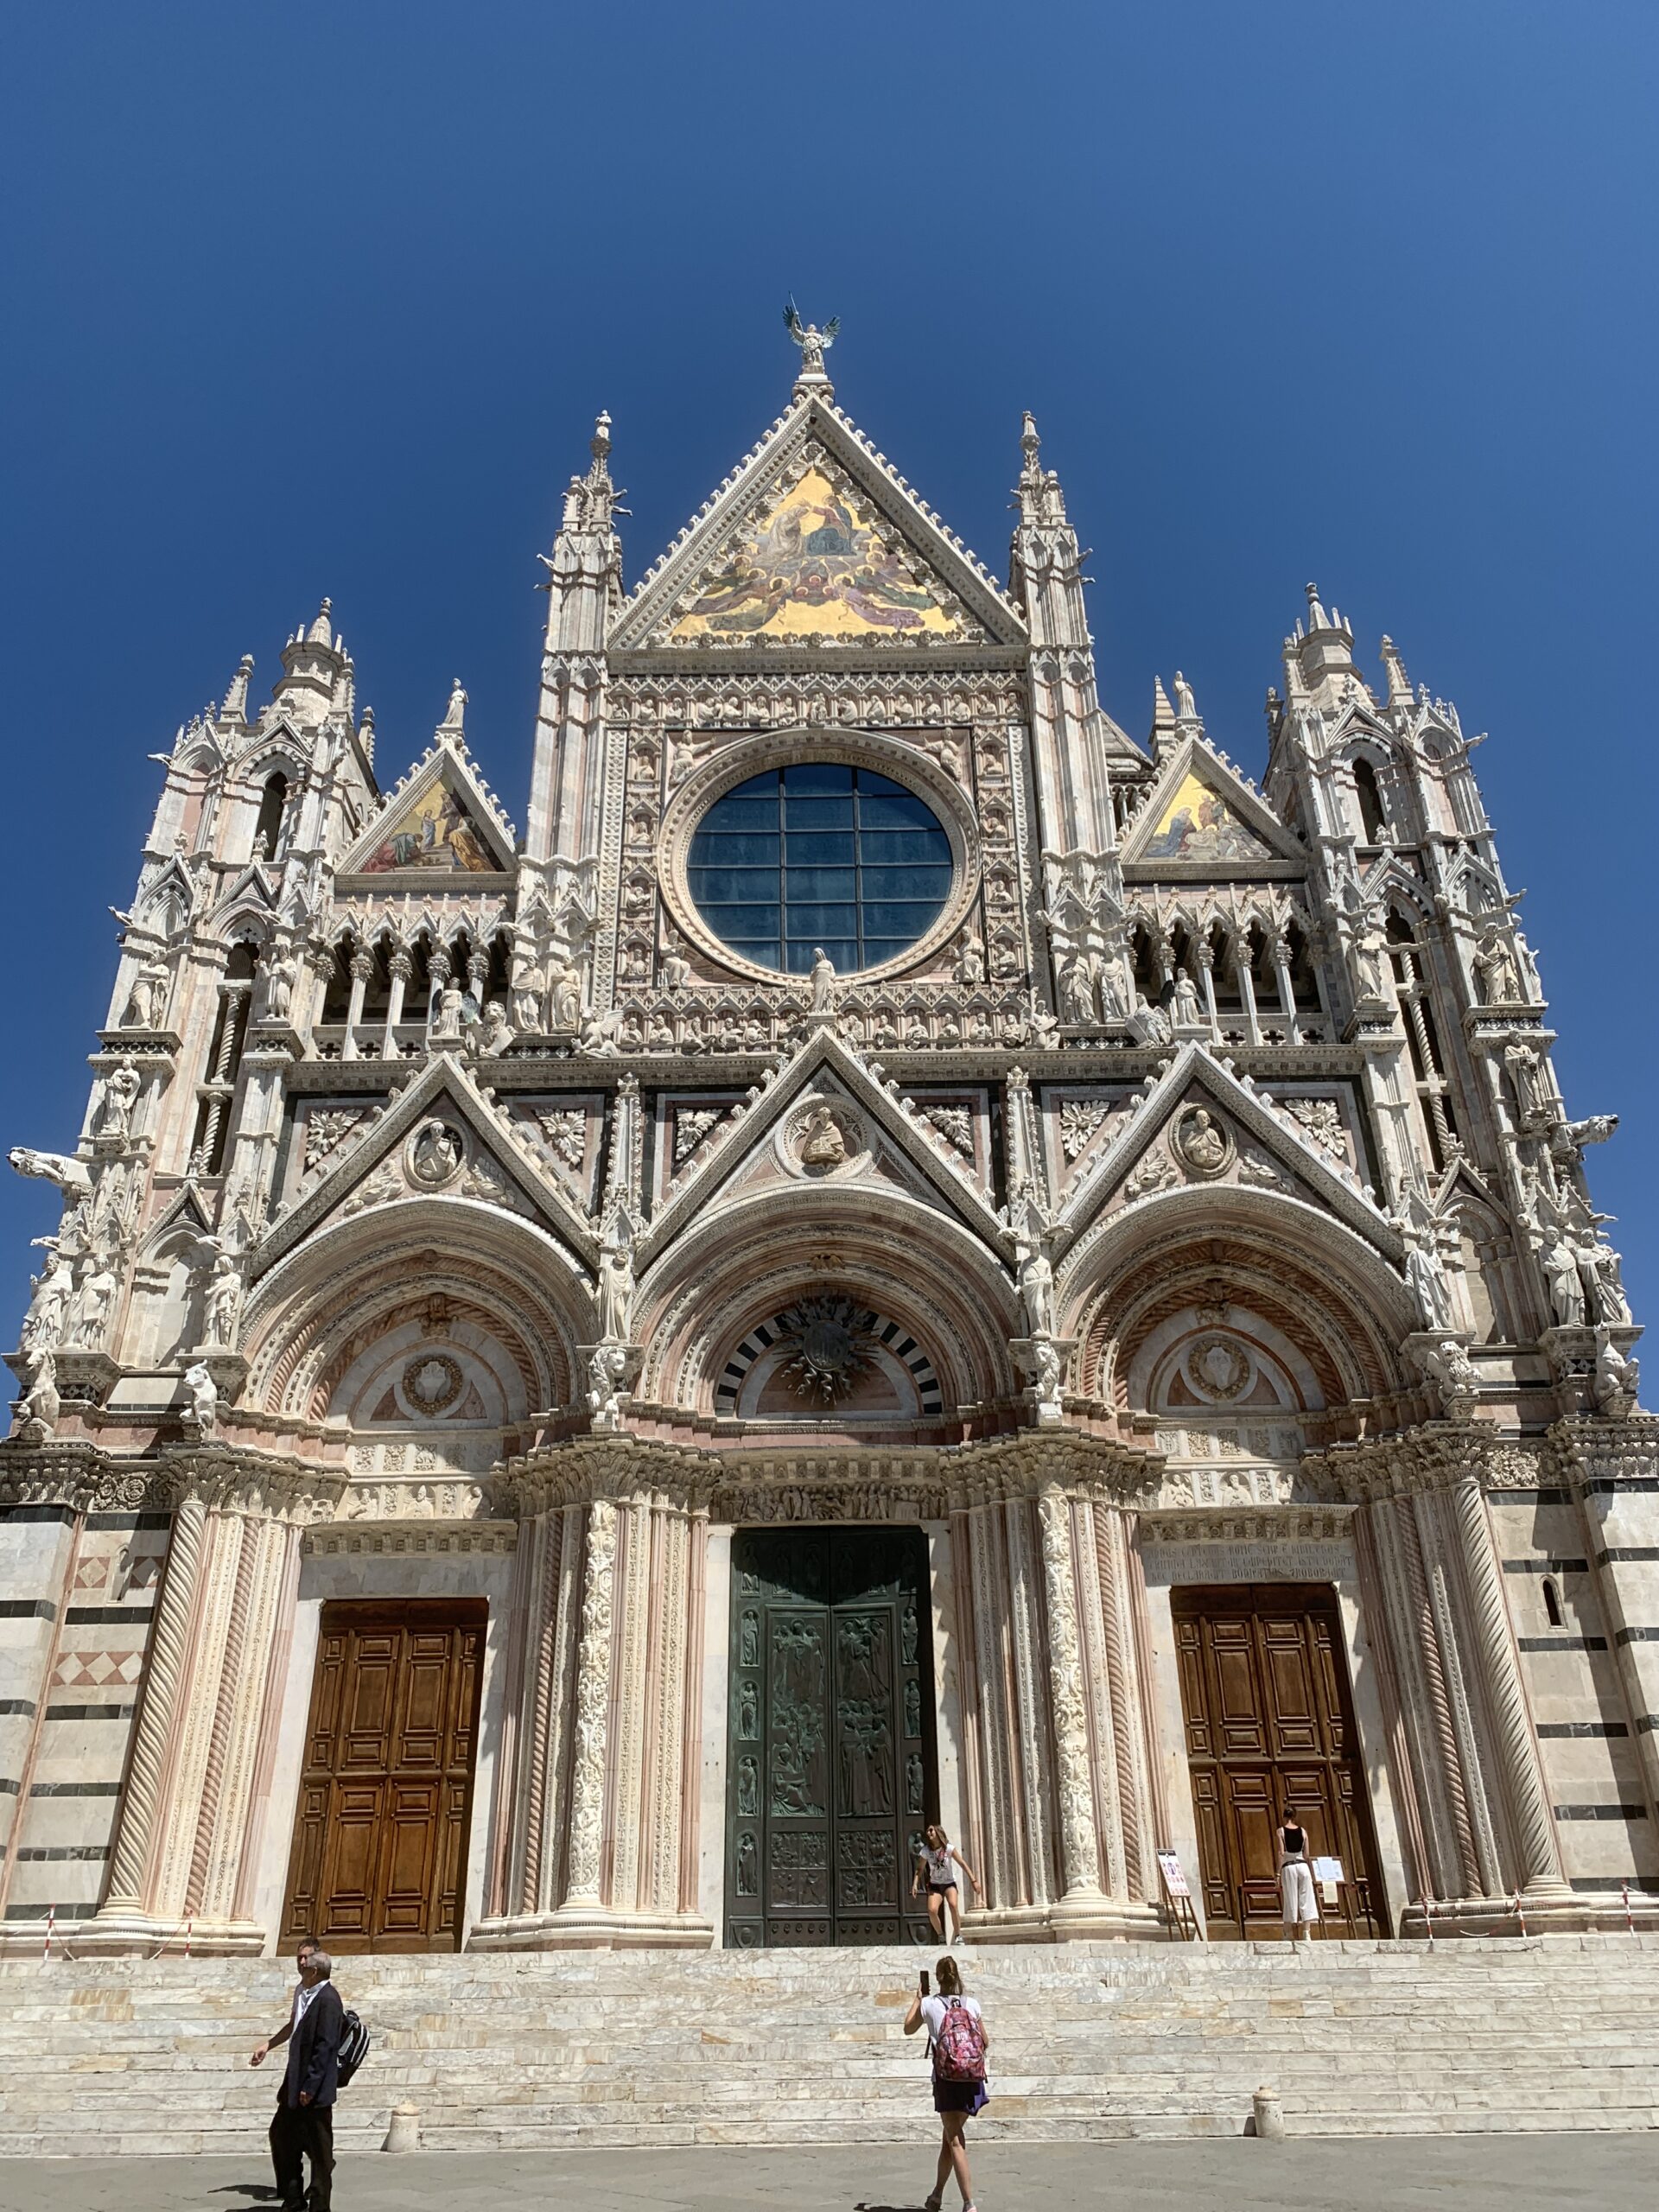 Dome of Siena, outside